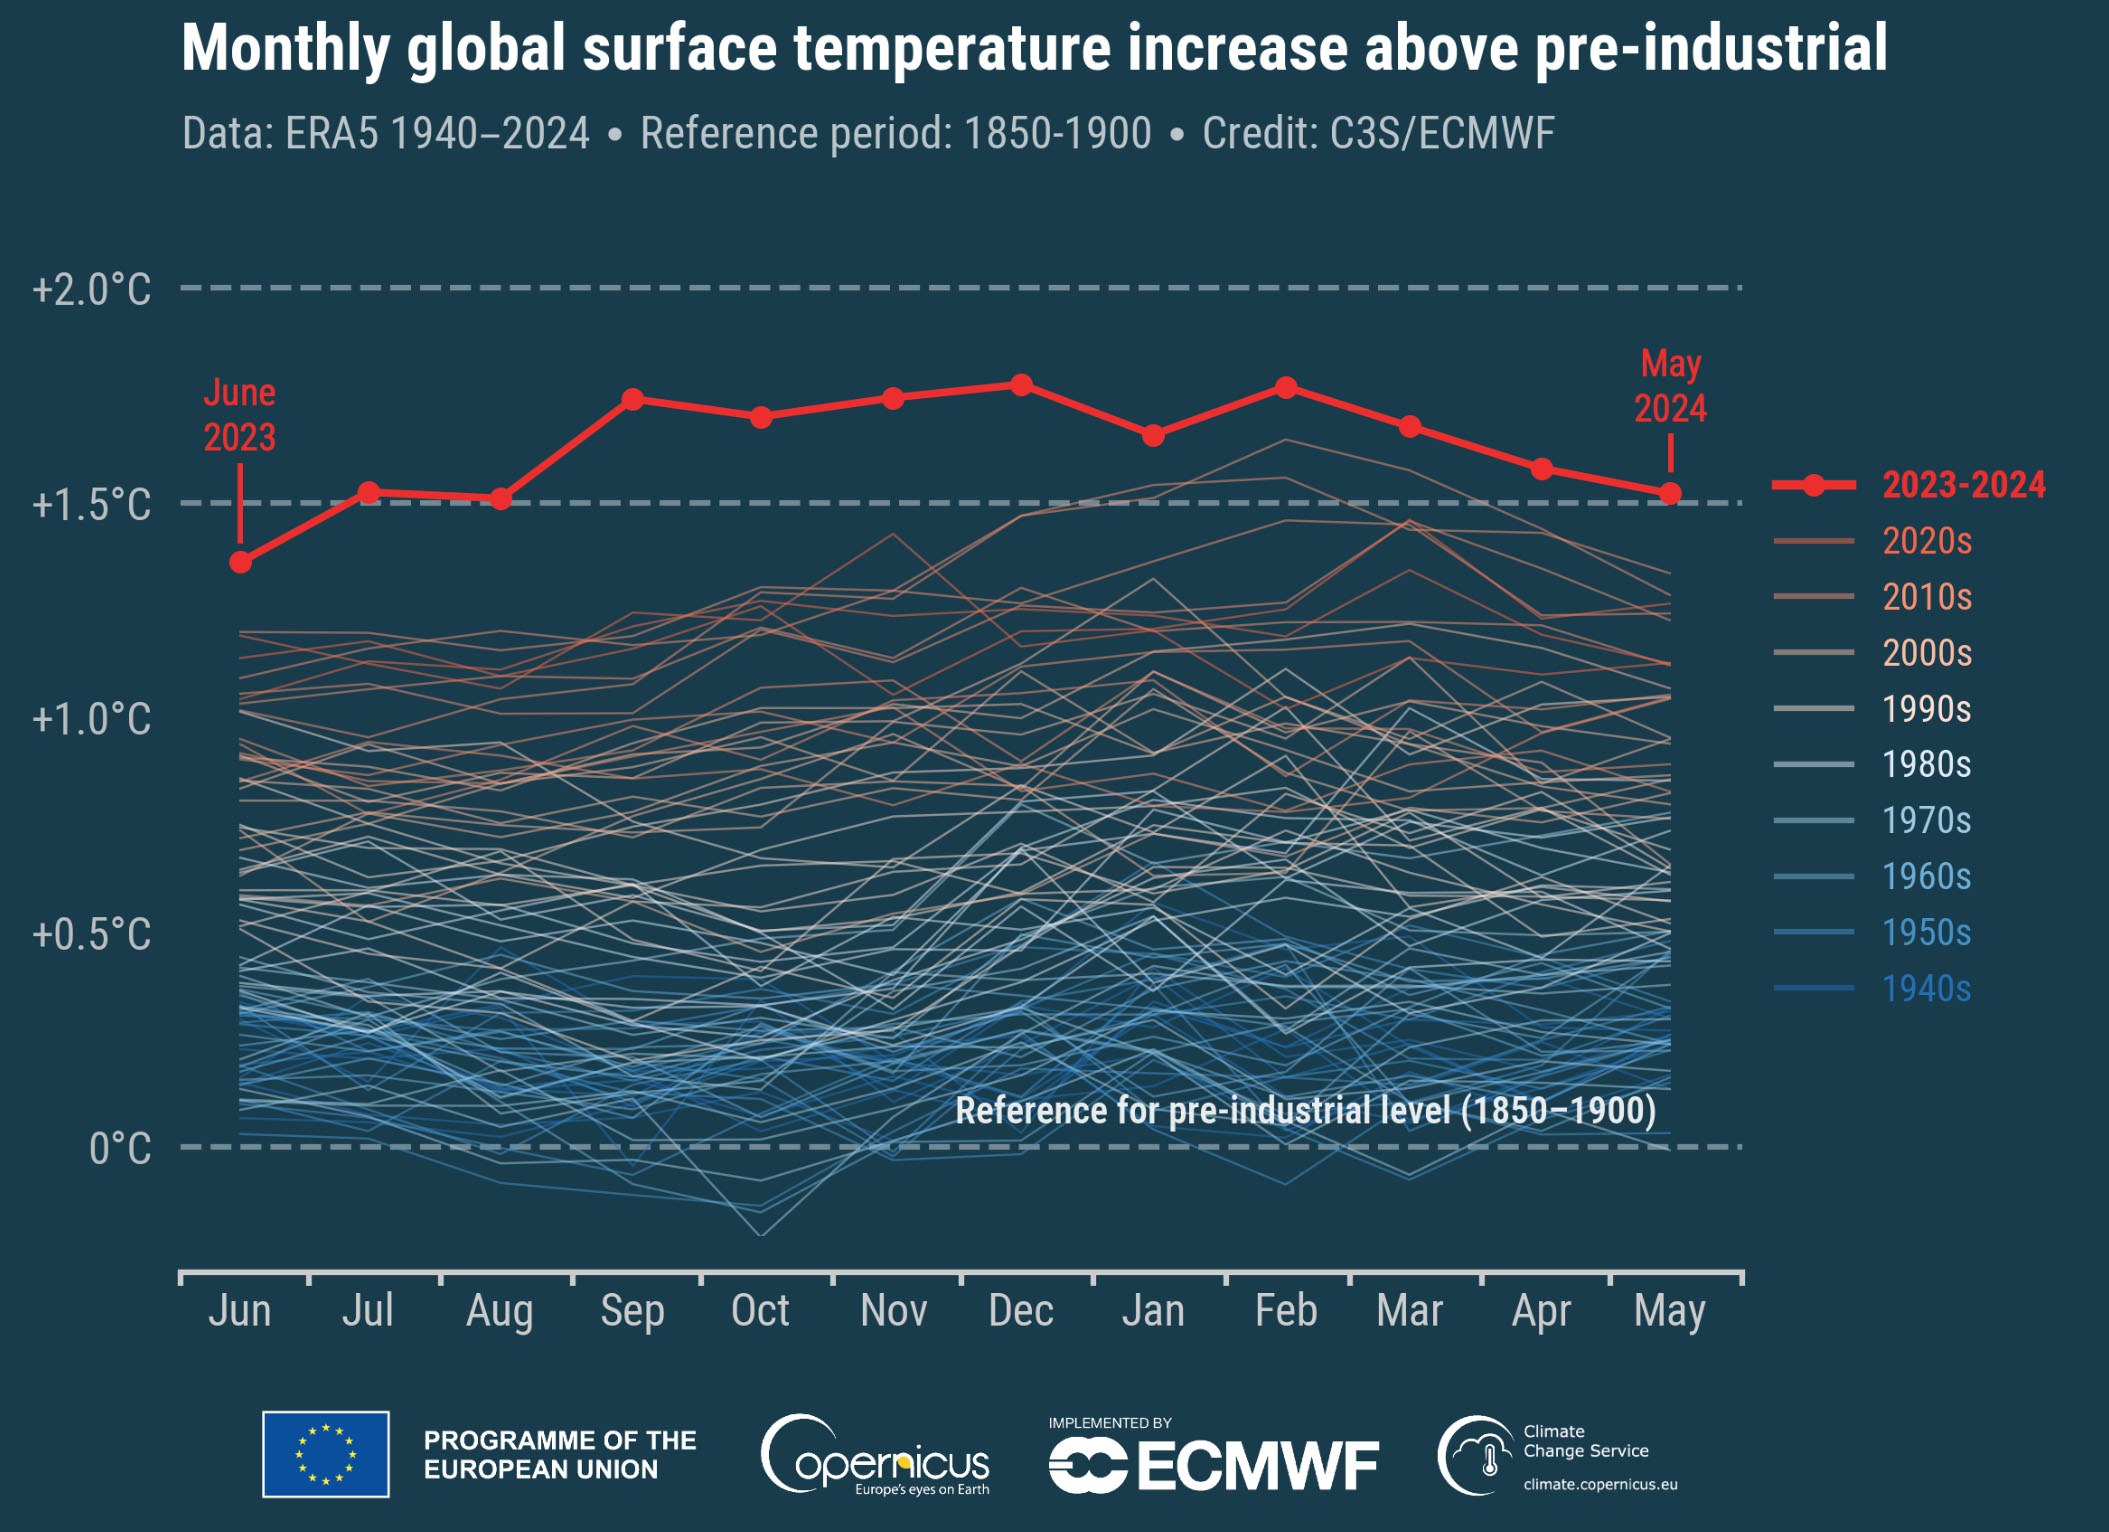 "Average global temperature June 2023 – May 2024: 1.63°C above the 1850-1900 pre-industrial average. Monthly global surface air temperature anomalies (°C) relative to 1850–1900 from January 1940 to May 2024, plotted as time series for consecutive 12-month periods spanning June to May of the following year. The last 12 months (June 2023 – May 2024) are shown with a thick red line while all other years with thin lines shaded according to the decade, from blue (1940s) to brick red (2020s). Data source: ERA5. Credit: C3S/ECMWF." NOTE: the 1.5°C 'limit' under the Paris Accord is based on averages exceeding 1.5°C for 20-30 years of past observations.